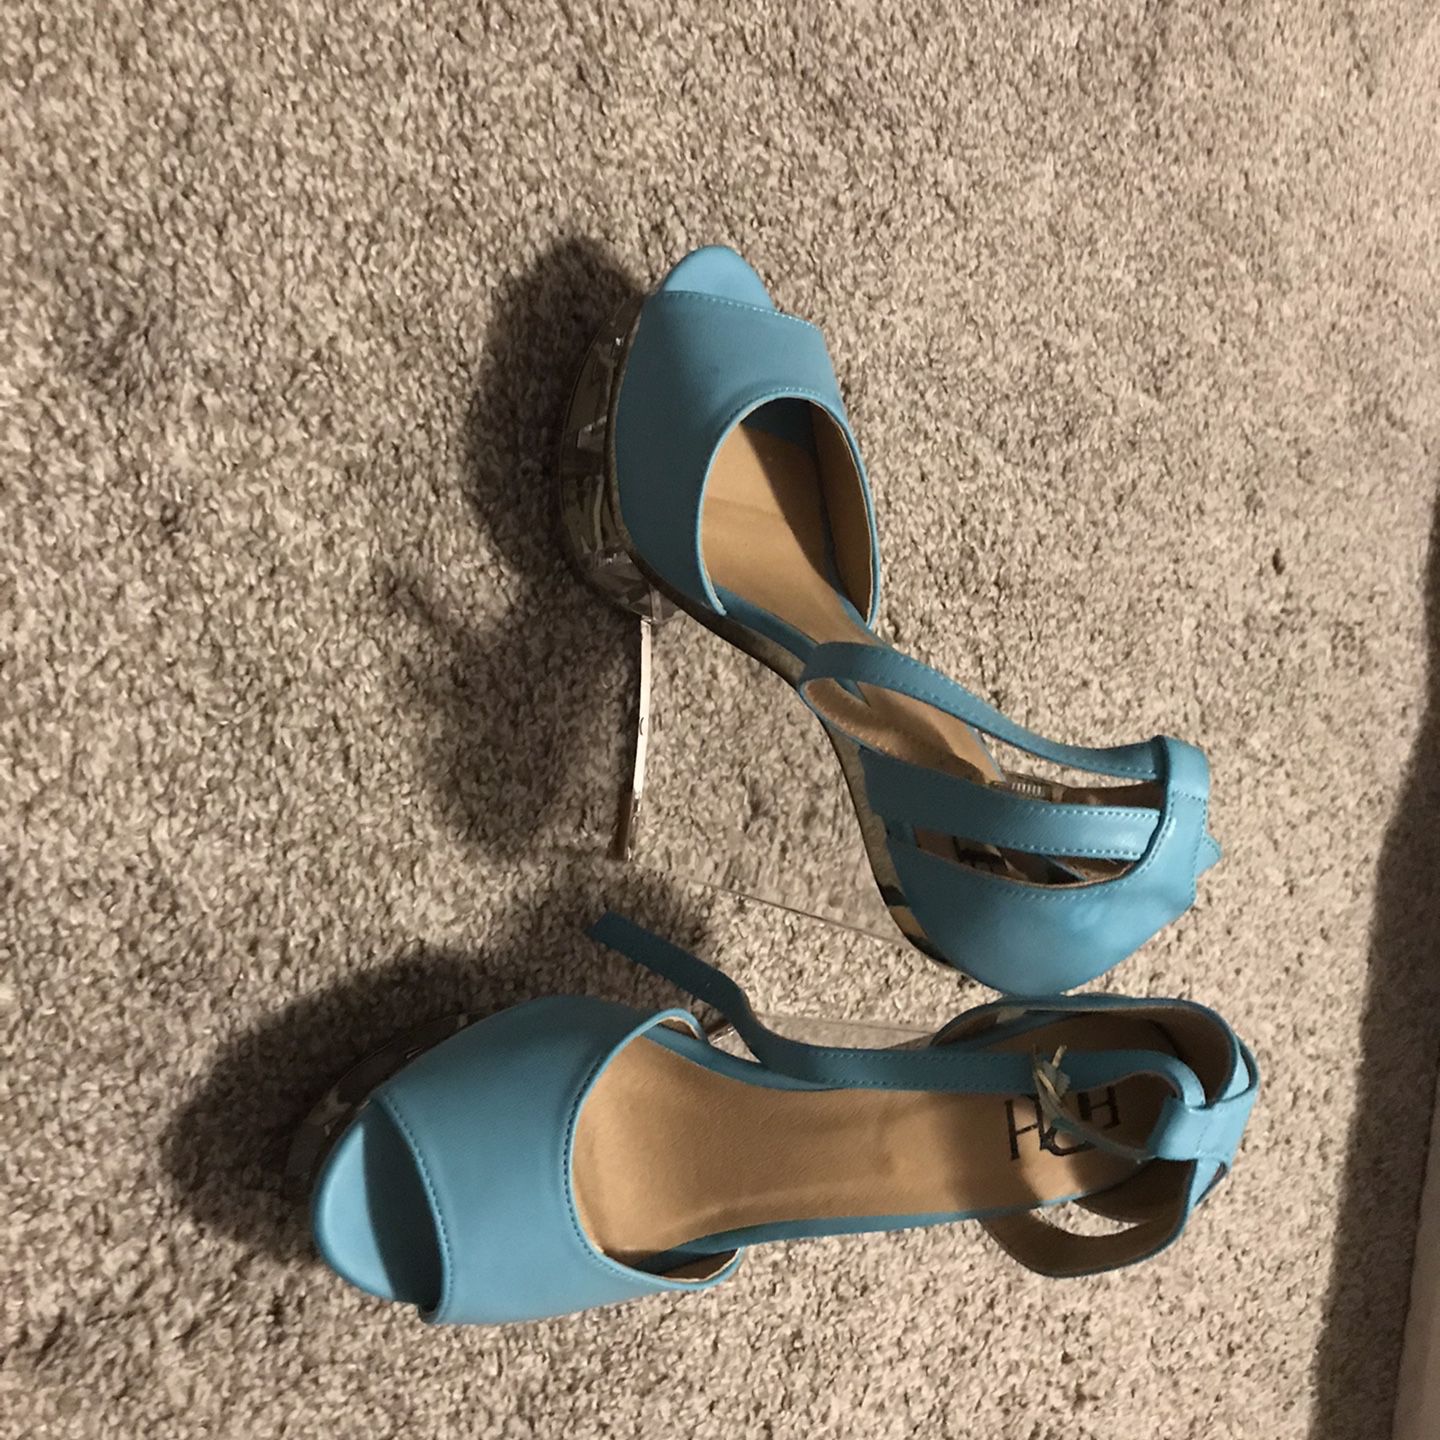 Brand New Light Blue Heels With Clear Wedges